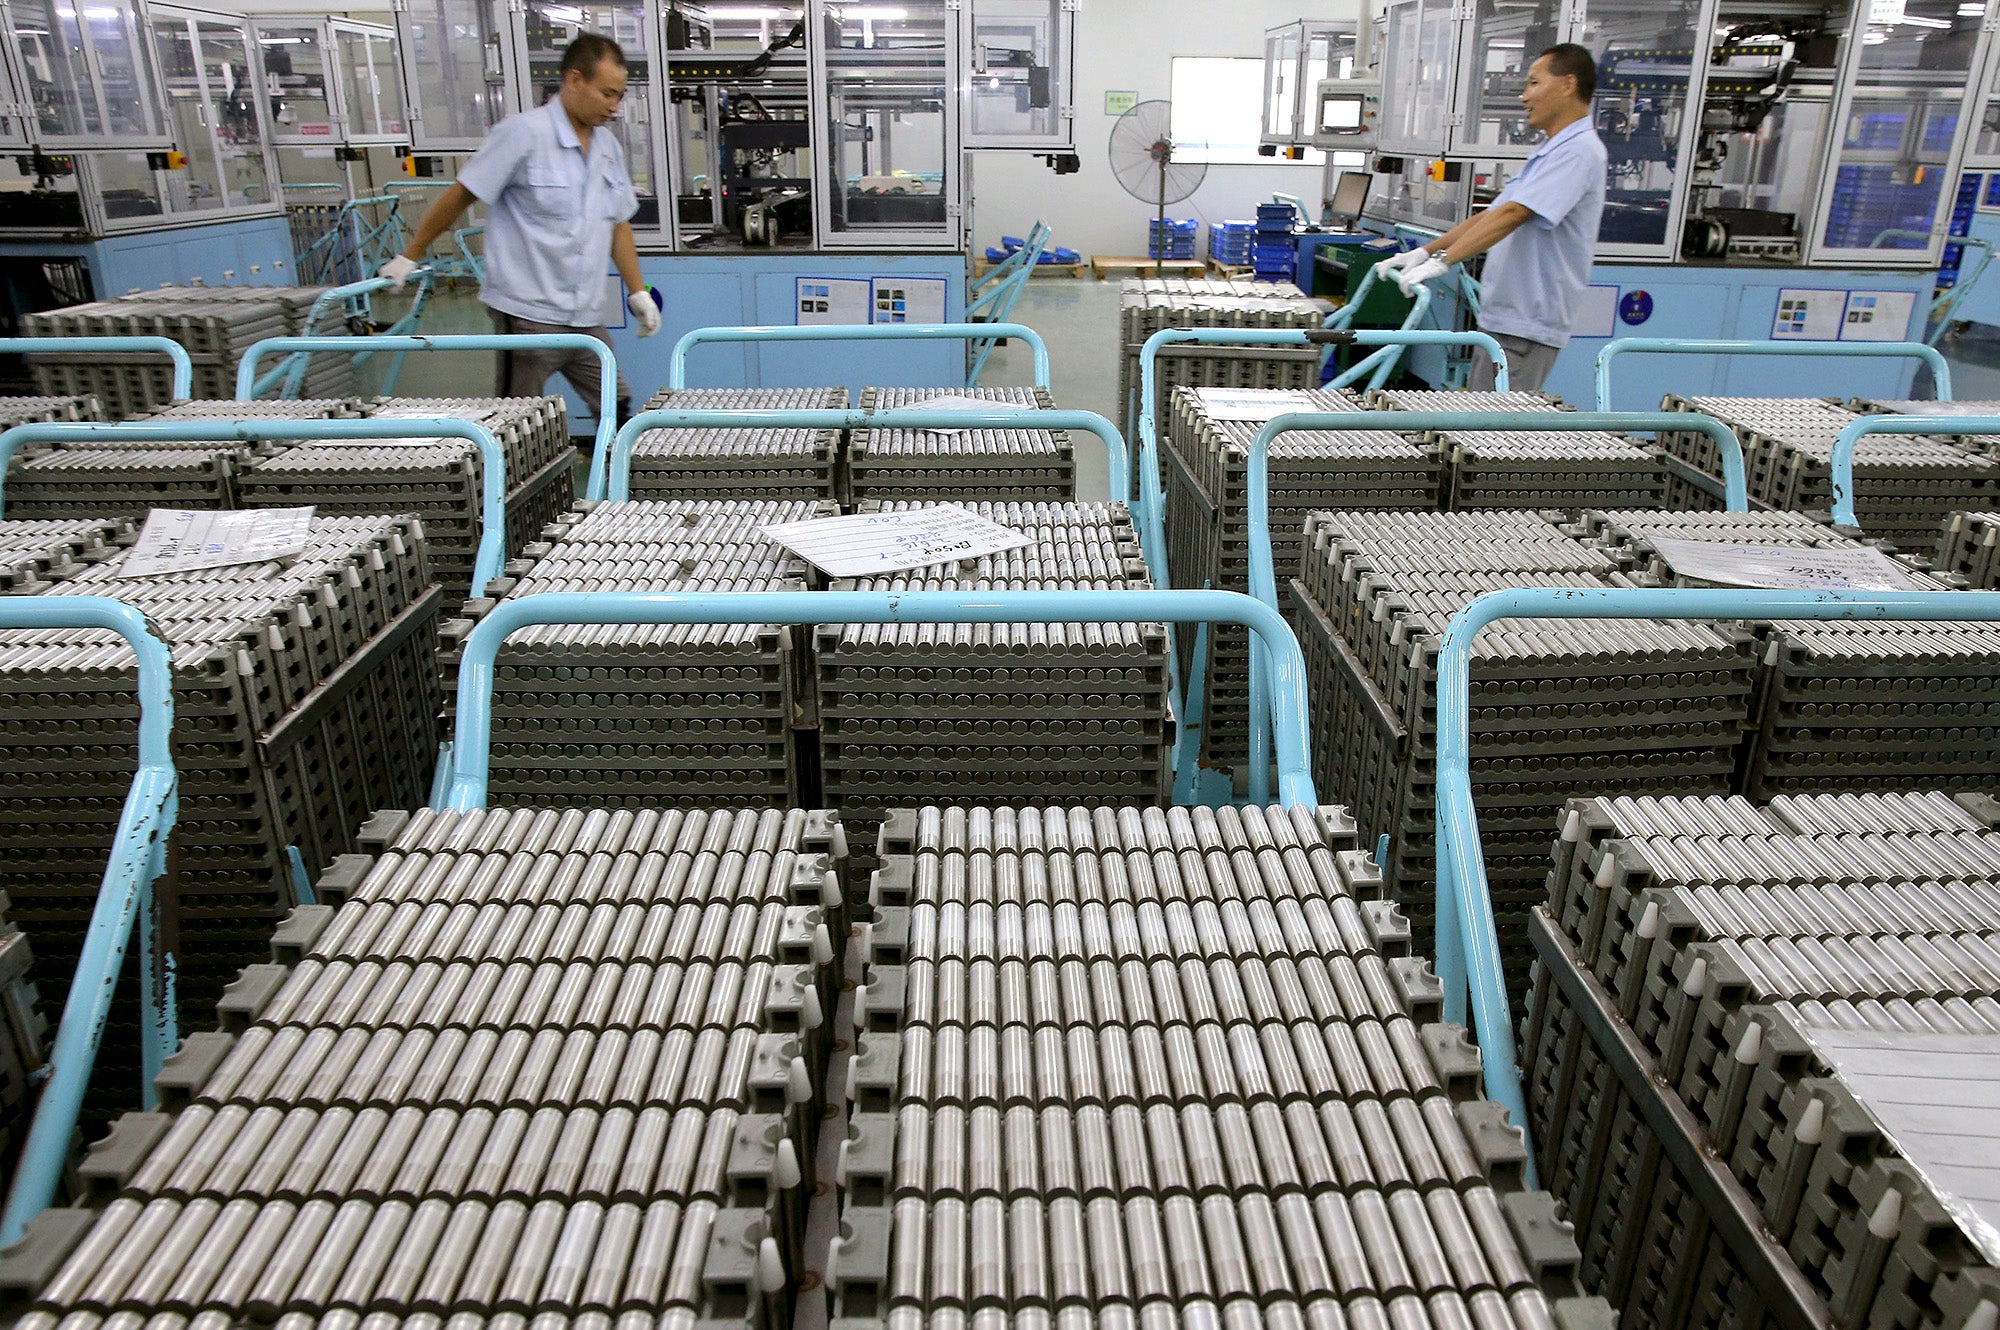 Workers transfer Lithium-ion batteries in a factory in Taizhou in east China's Jiangsu province.